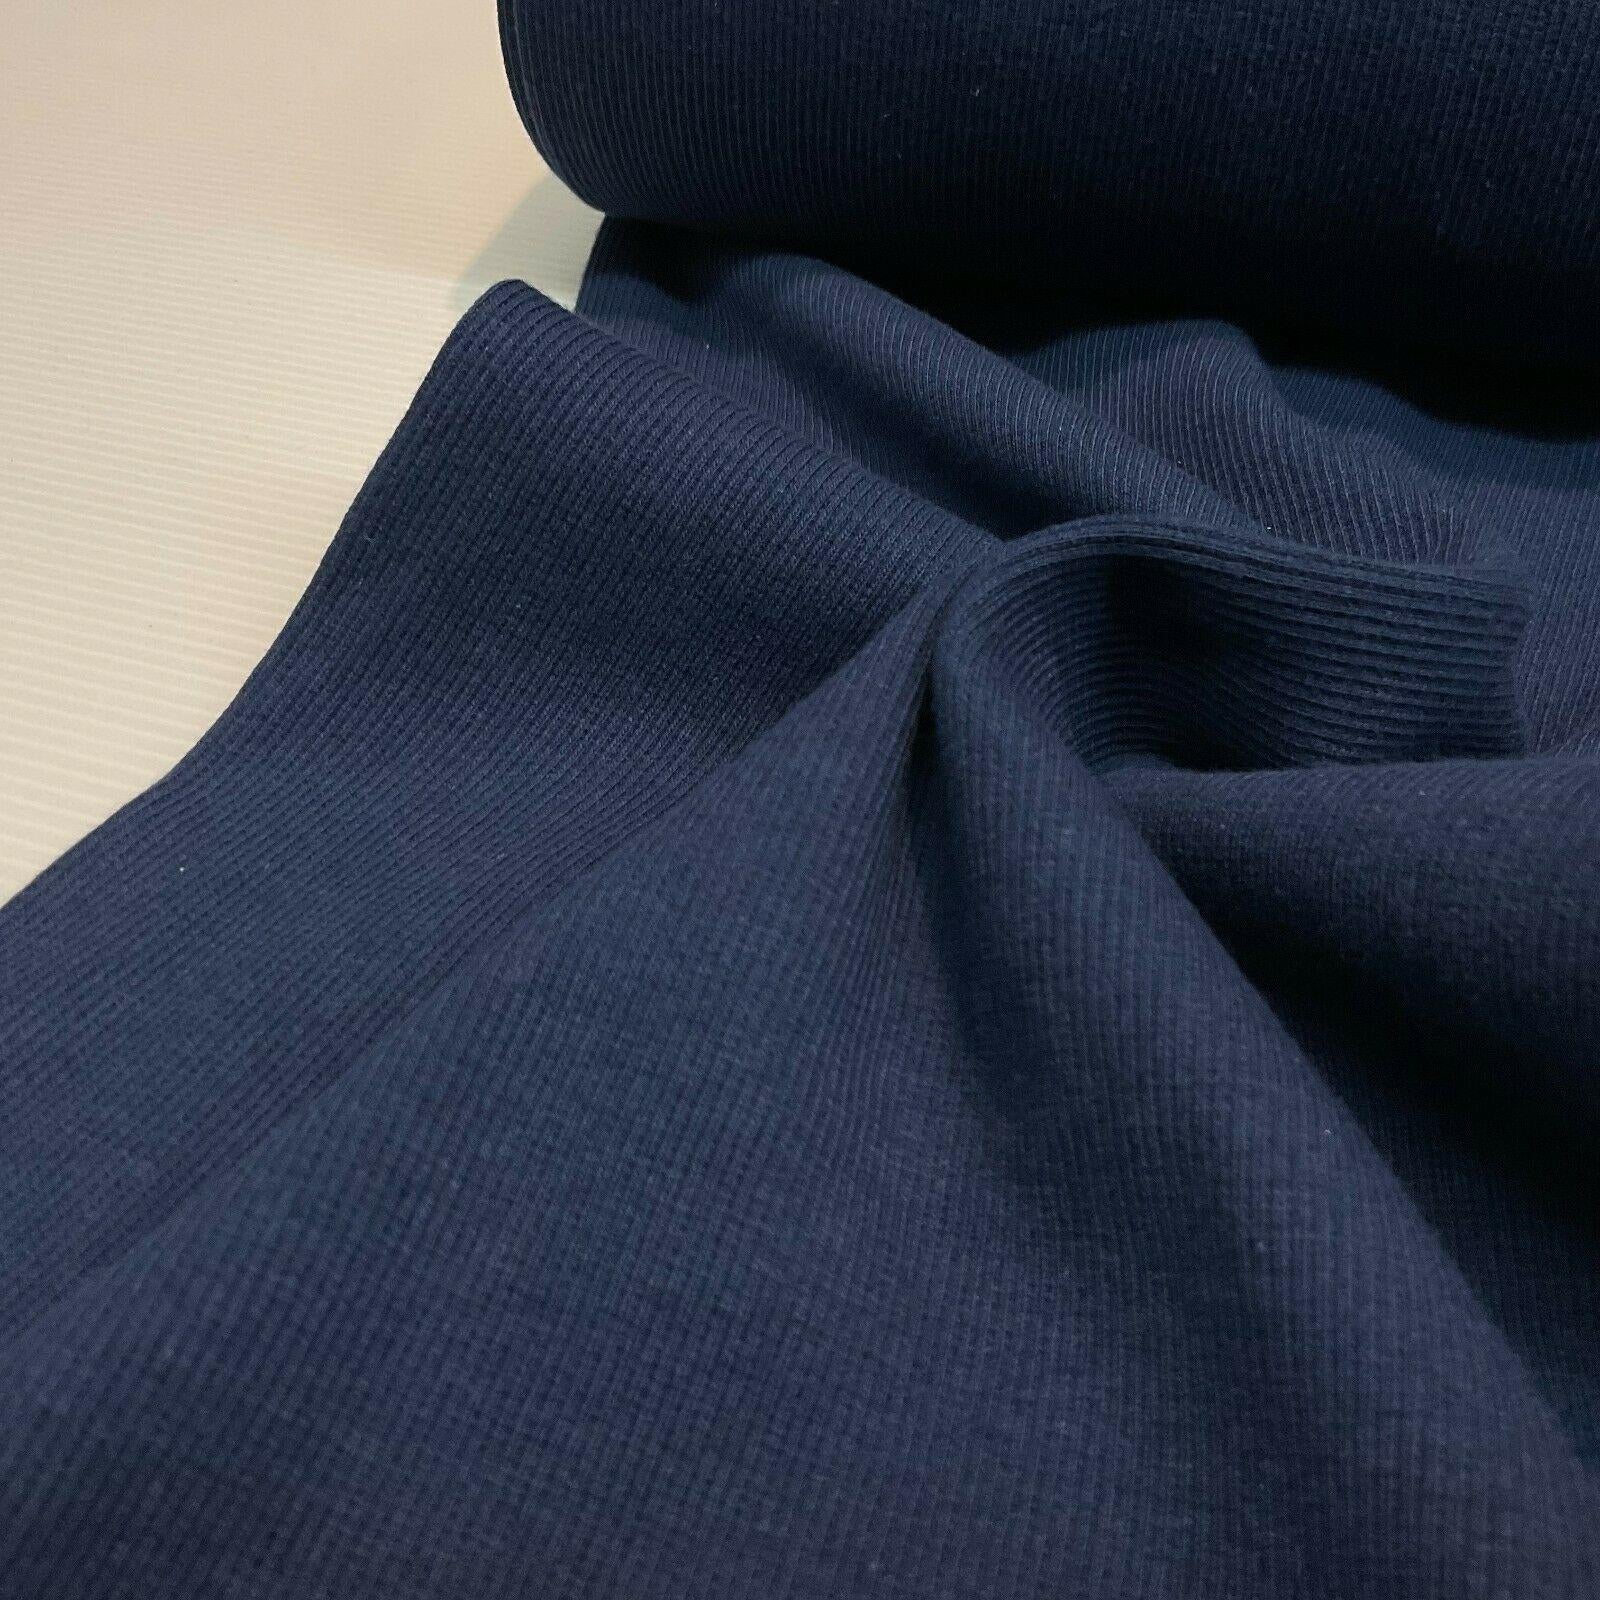 Plain Tubular Ribbing Stretch Jersey Fabric ideal for tops t-shirts 27cm M1588